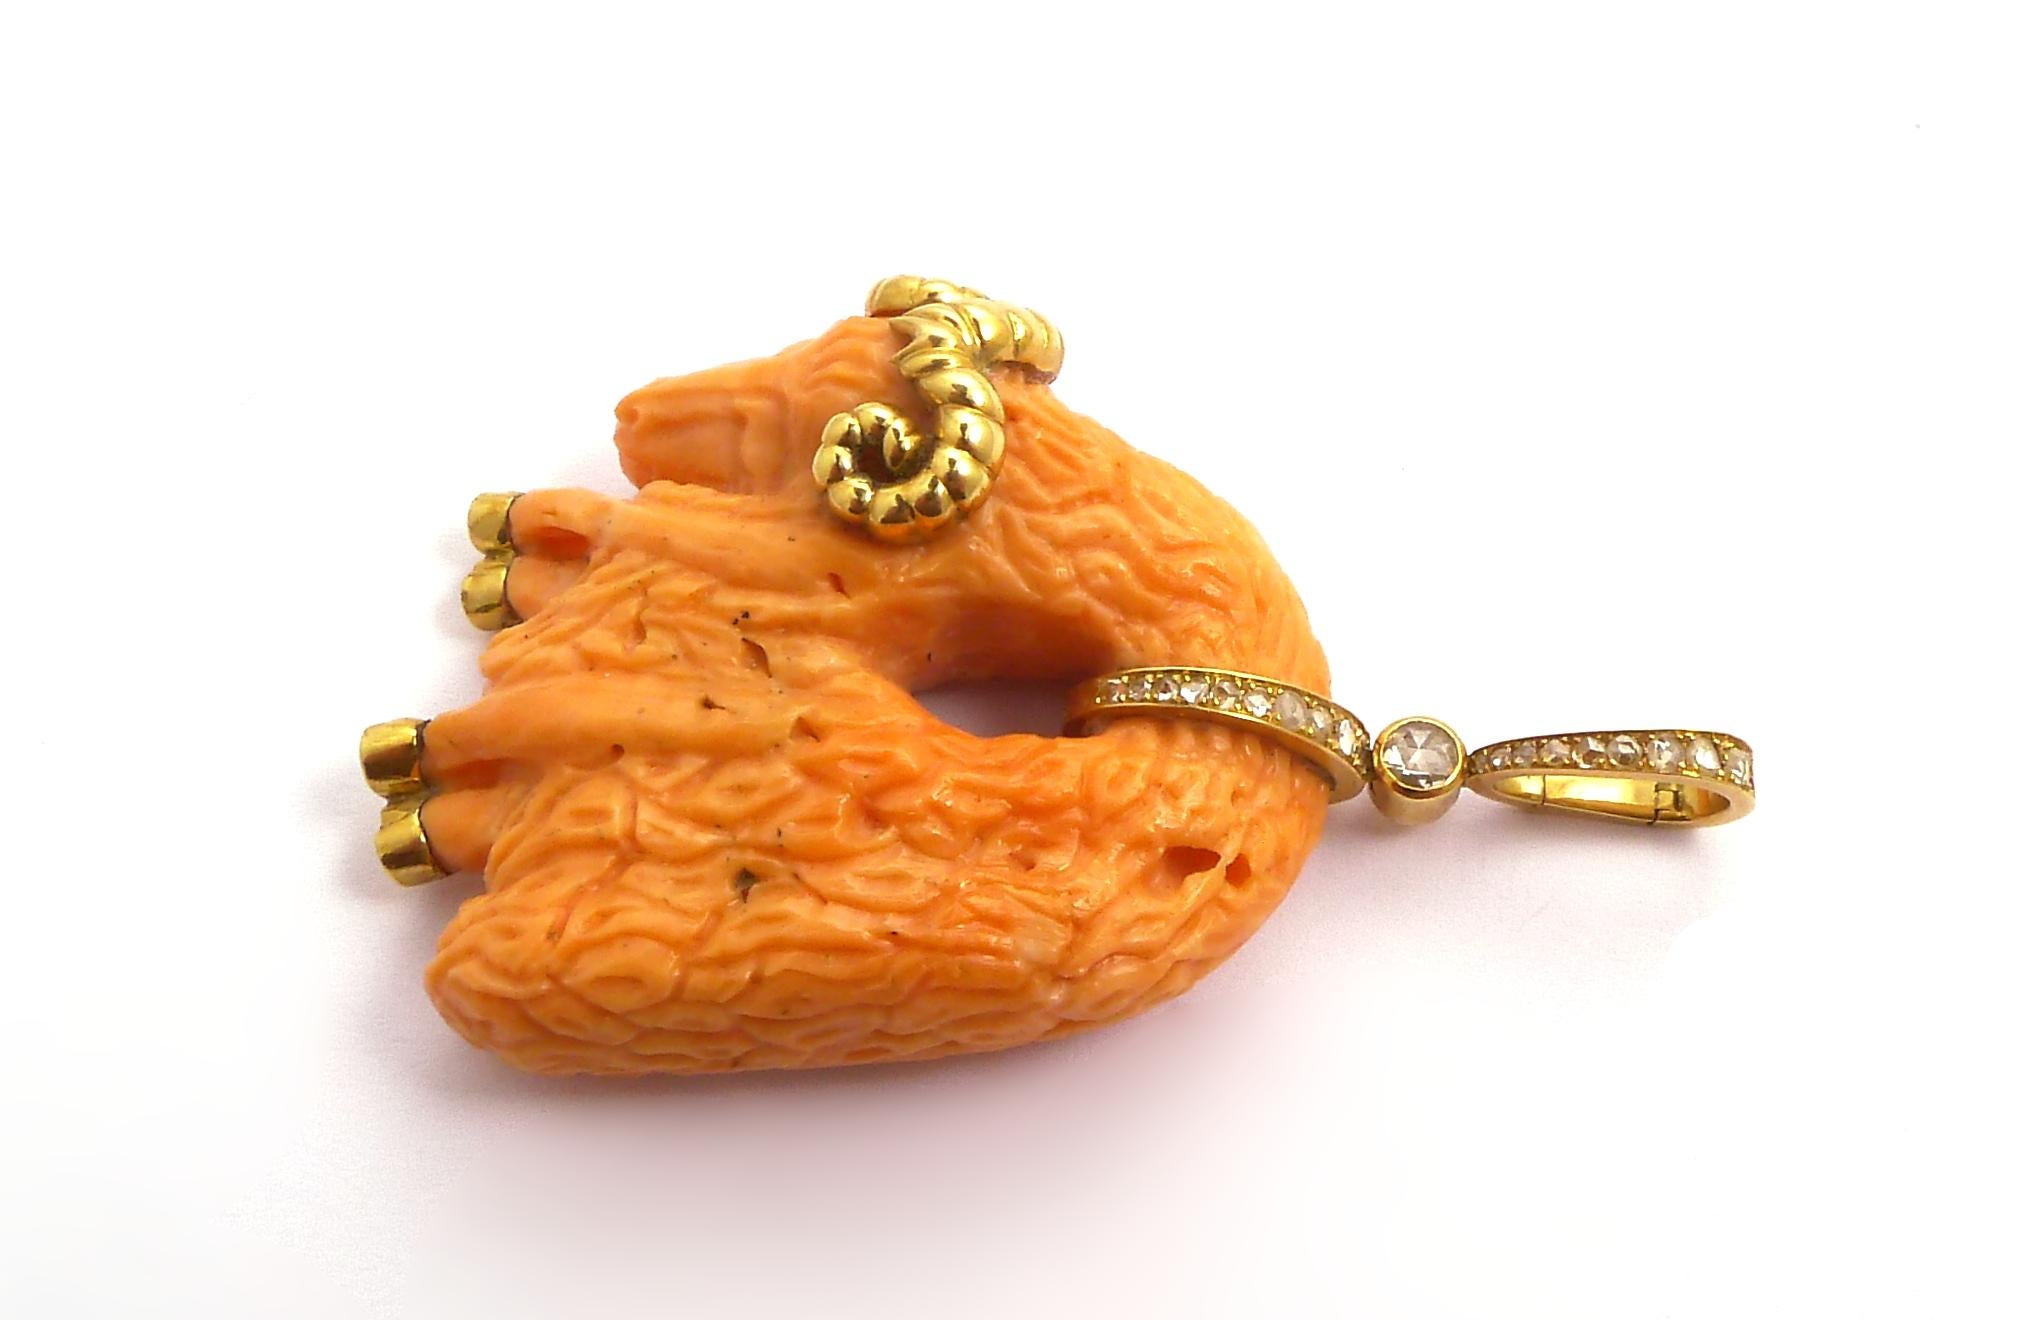 The carved coral hanging ram enhanced with gold detail and rose-cut diamond suspension hoop

Mounted in 18K yellow gold